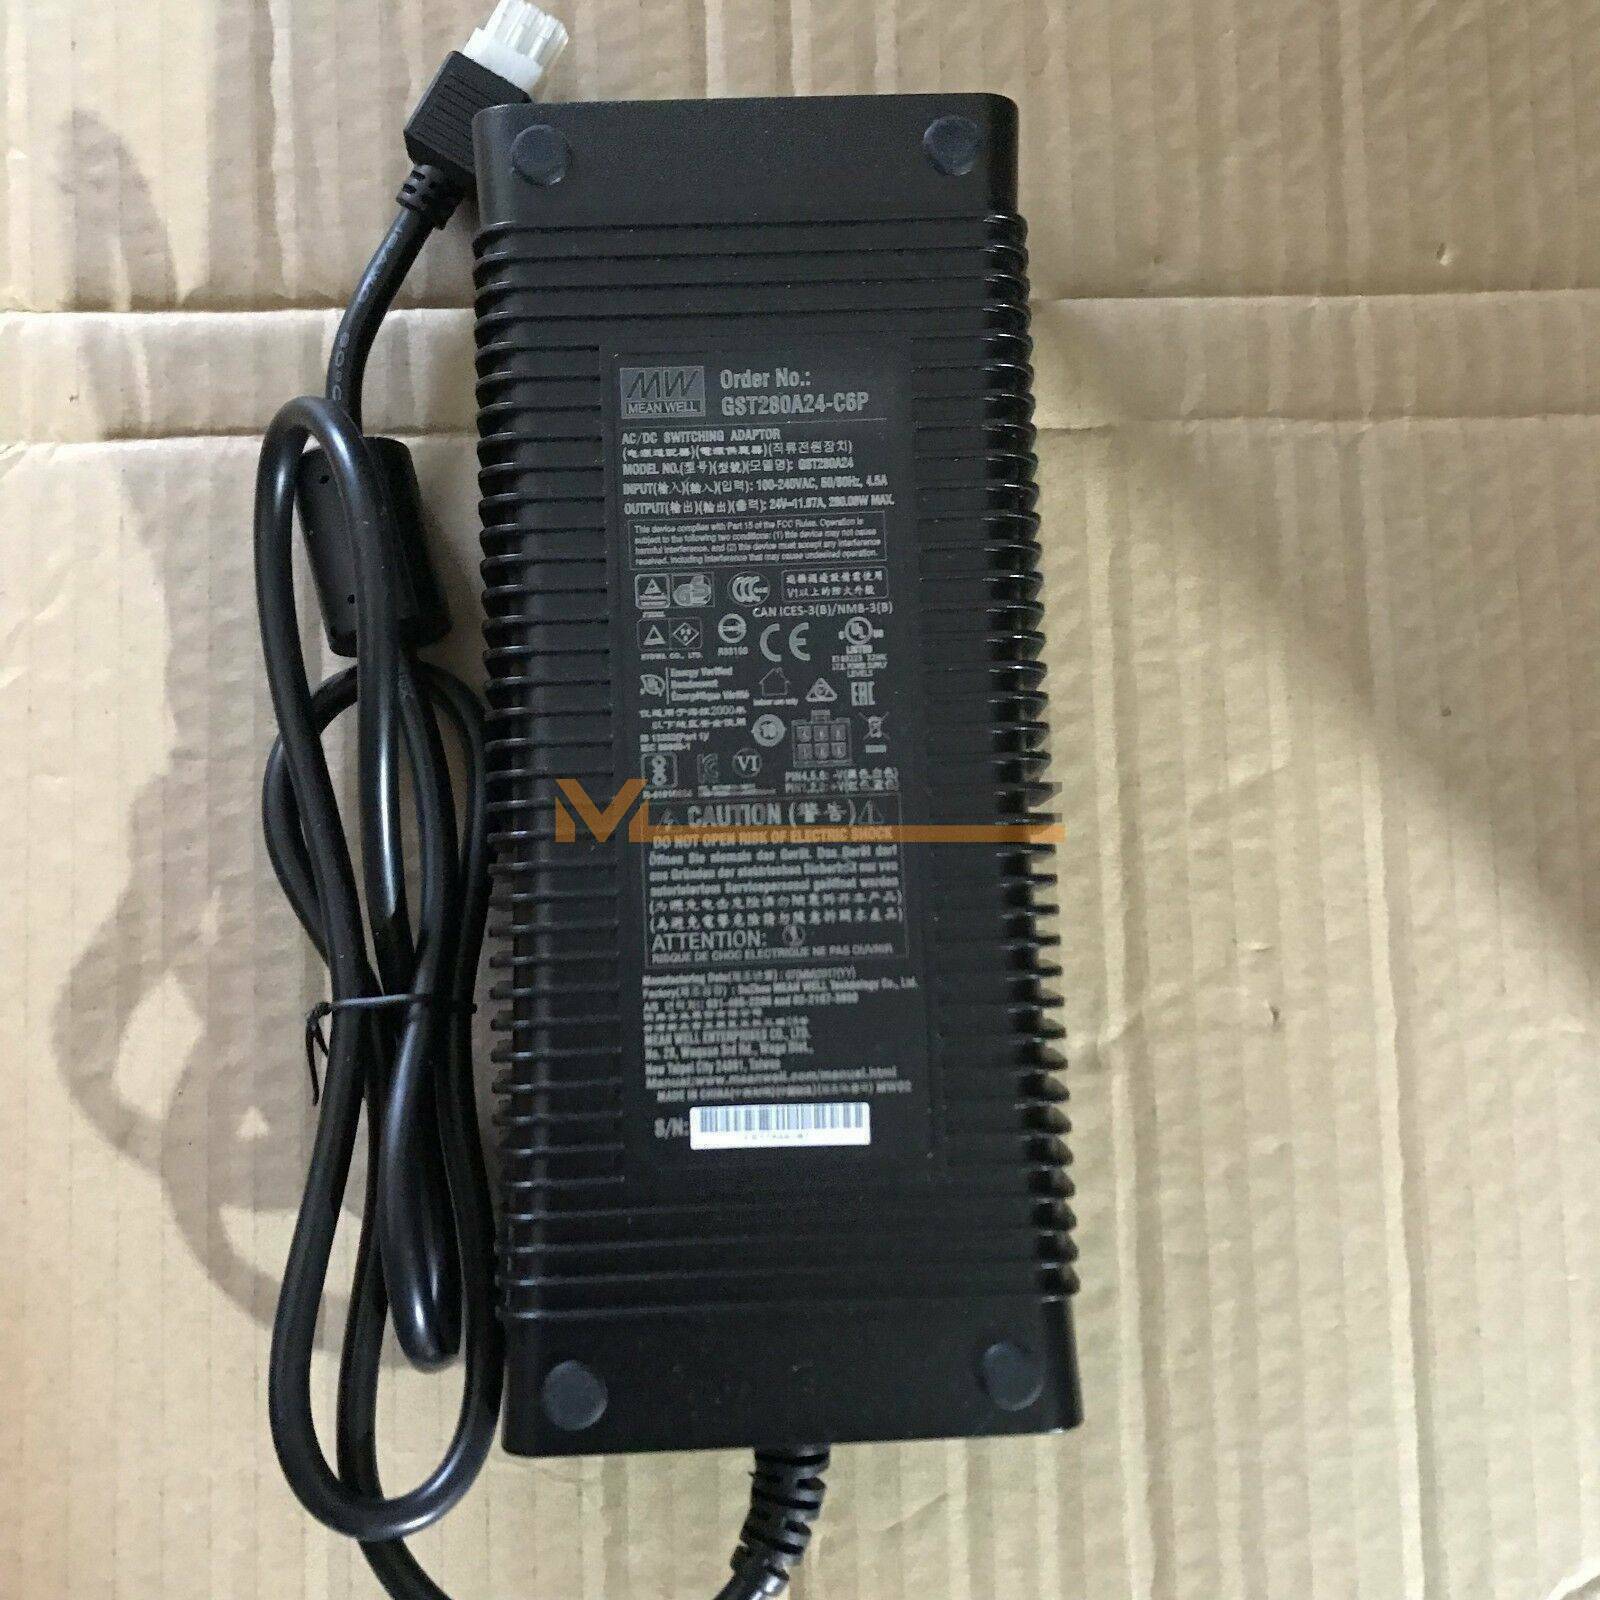 ONE MEAN WELL GST280A24-C6P 280W 24V 11.67A Industrial Adaptor Brand: MW MEAN WELL MPN: Does Not Apply Model: G